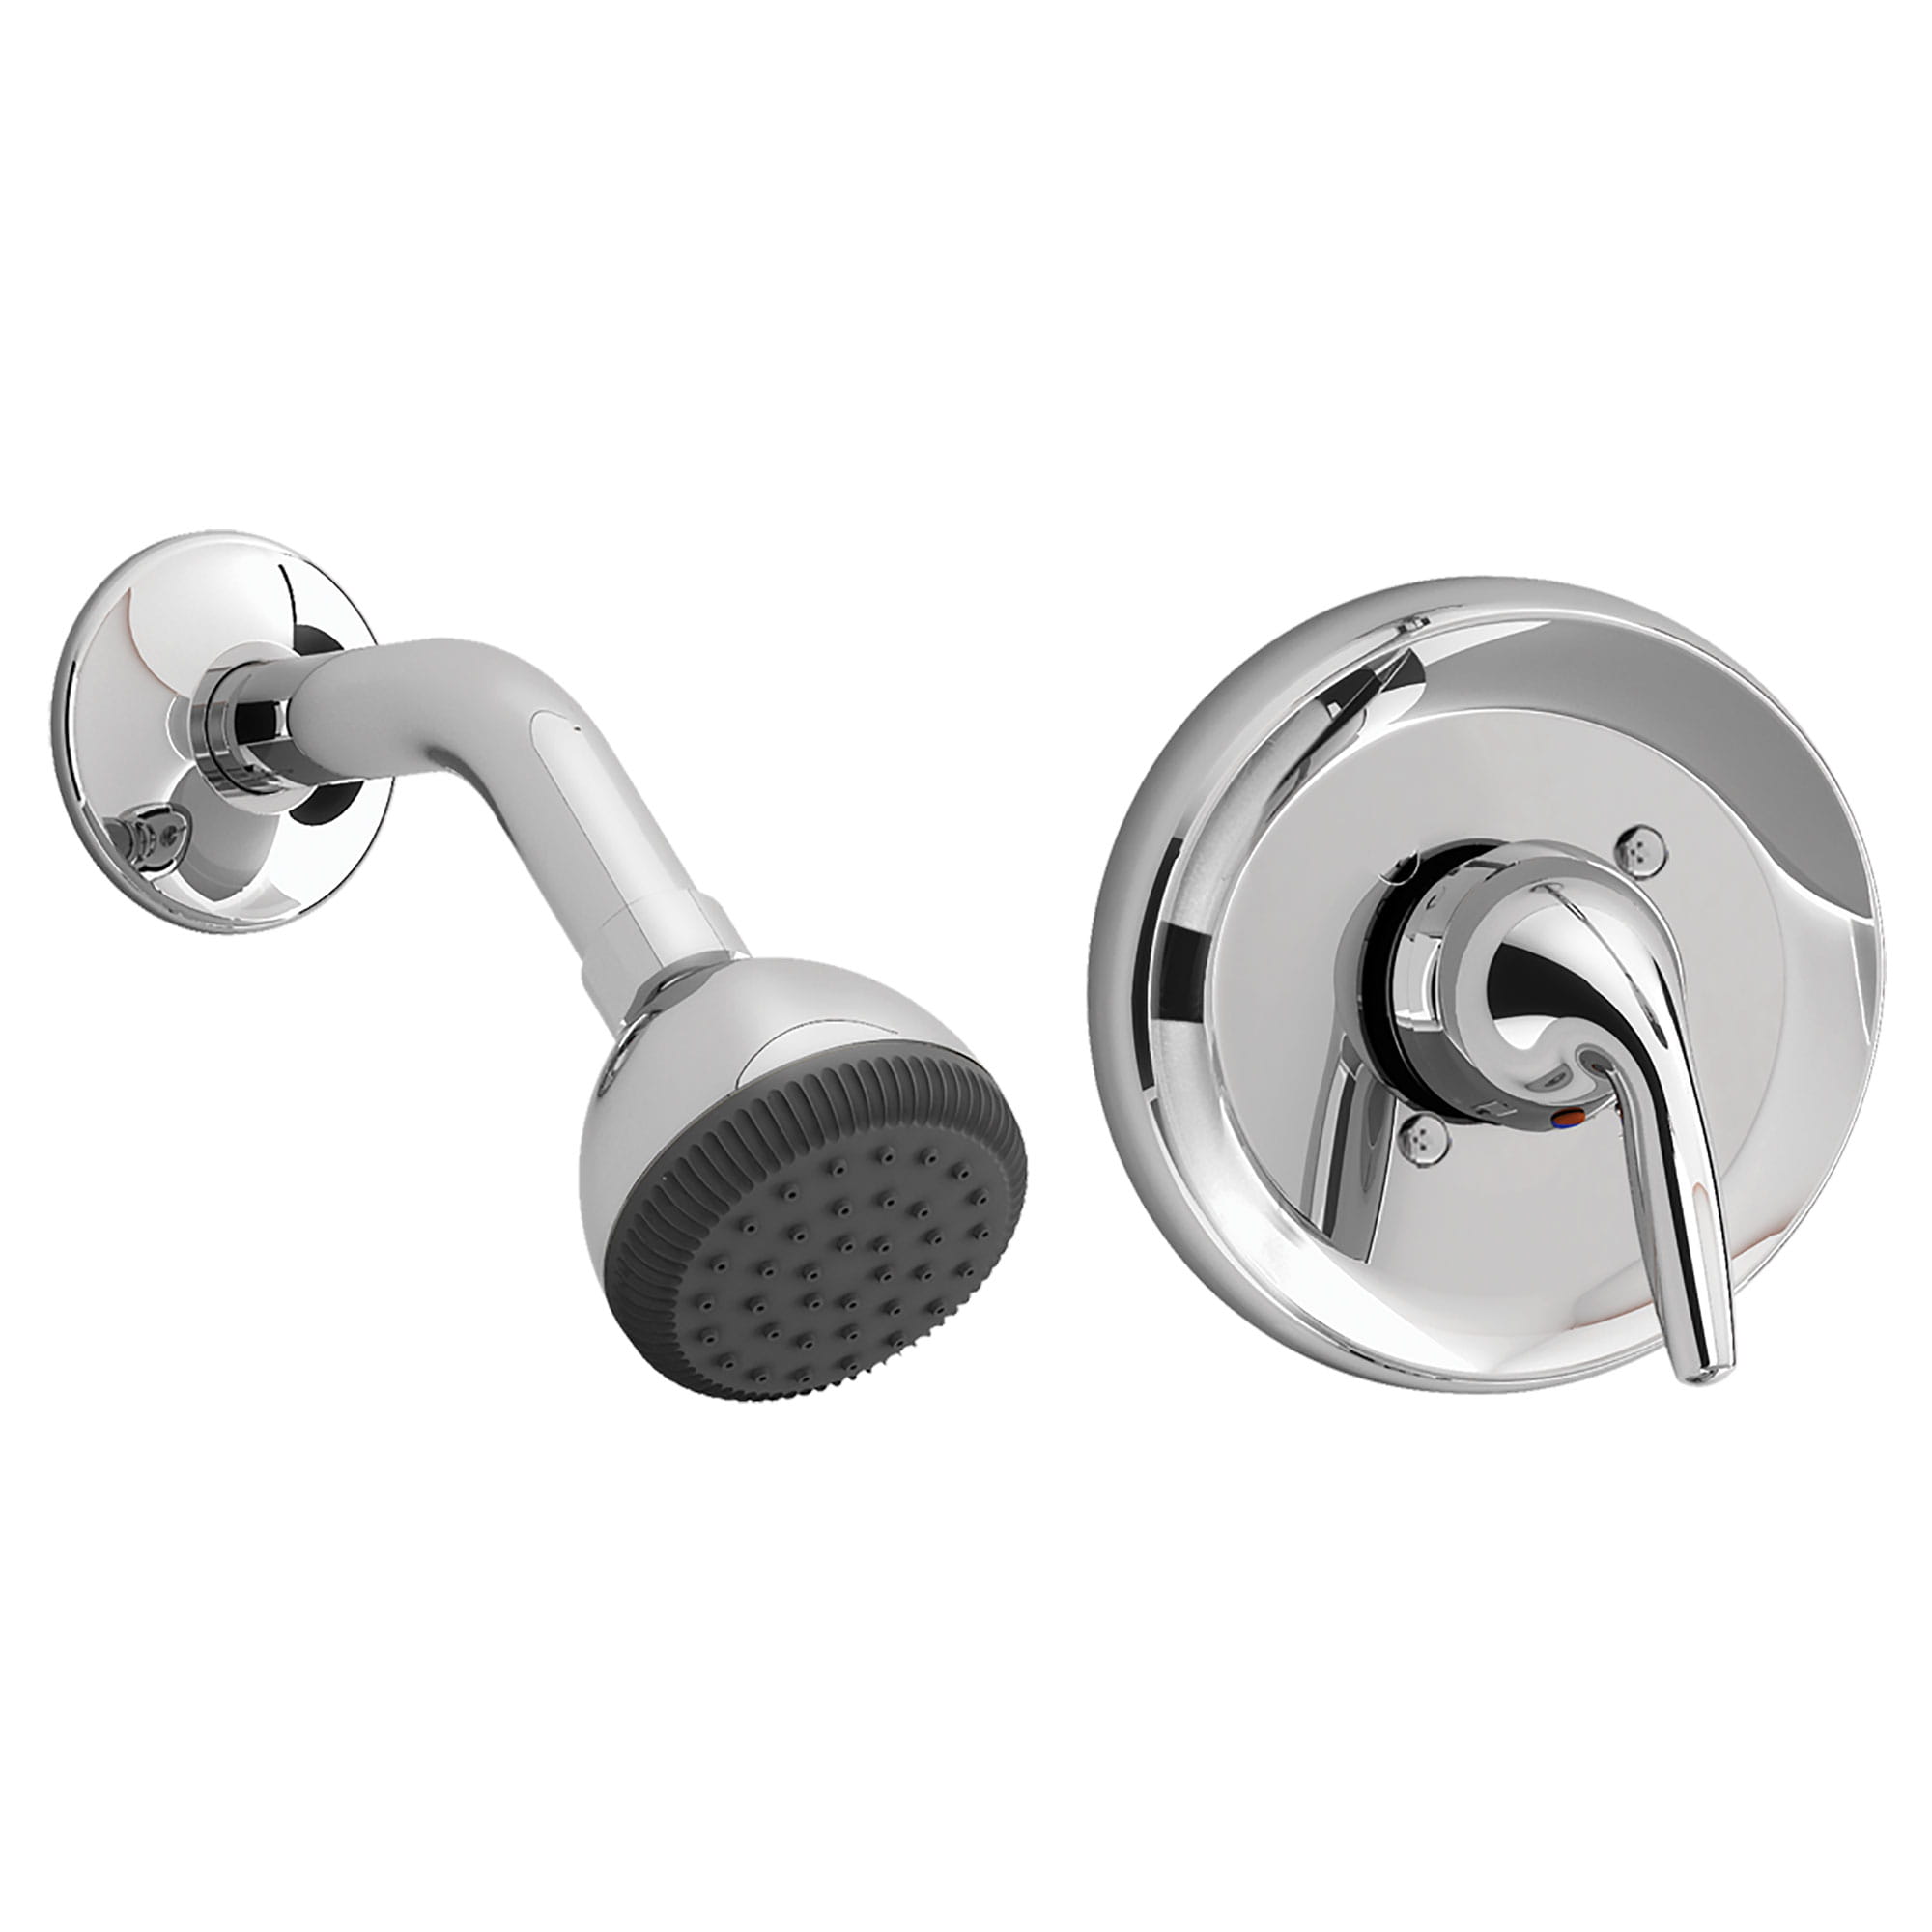 Jocelyn 25 GPM Shower Trim Kit with Pressure Balance Valve Cartridge and Lever Handle CHROME